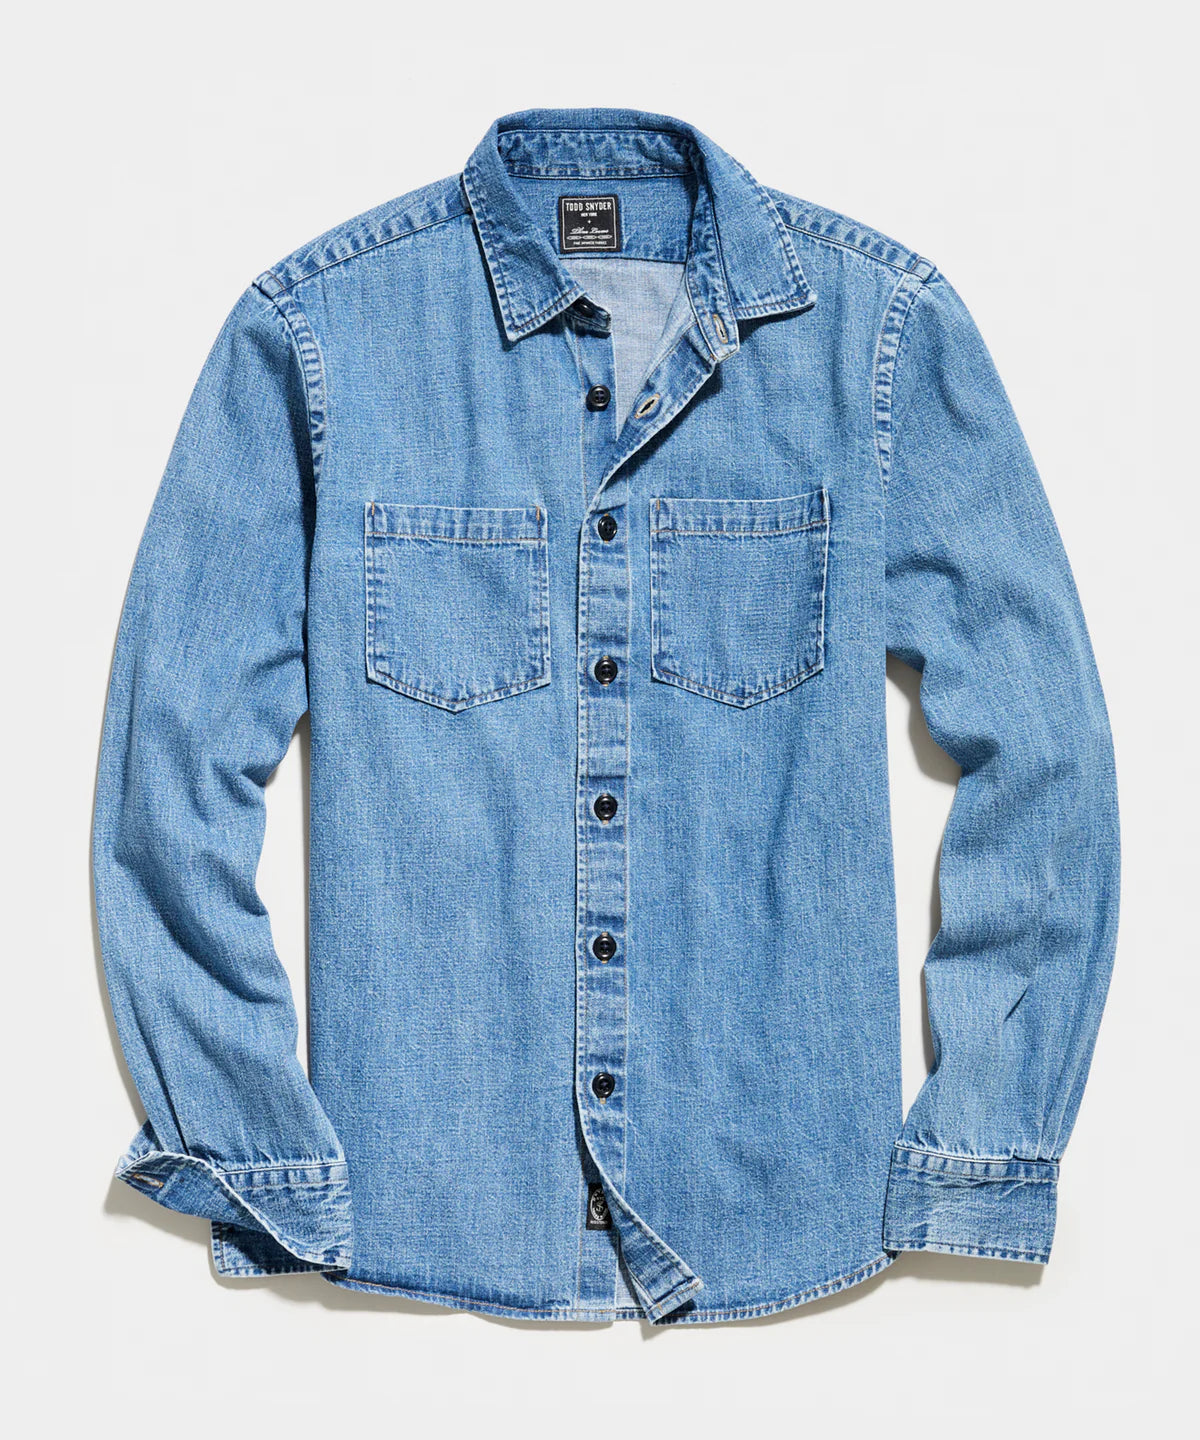 Todd Snyder - TODD SNYDER JAPANESE DENIM OVERSHIRT IN STONE WASH - Rent With Thred